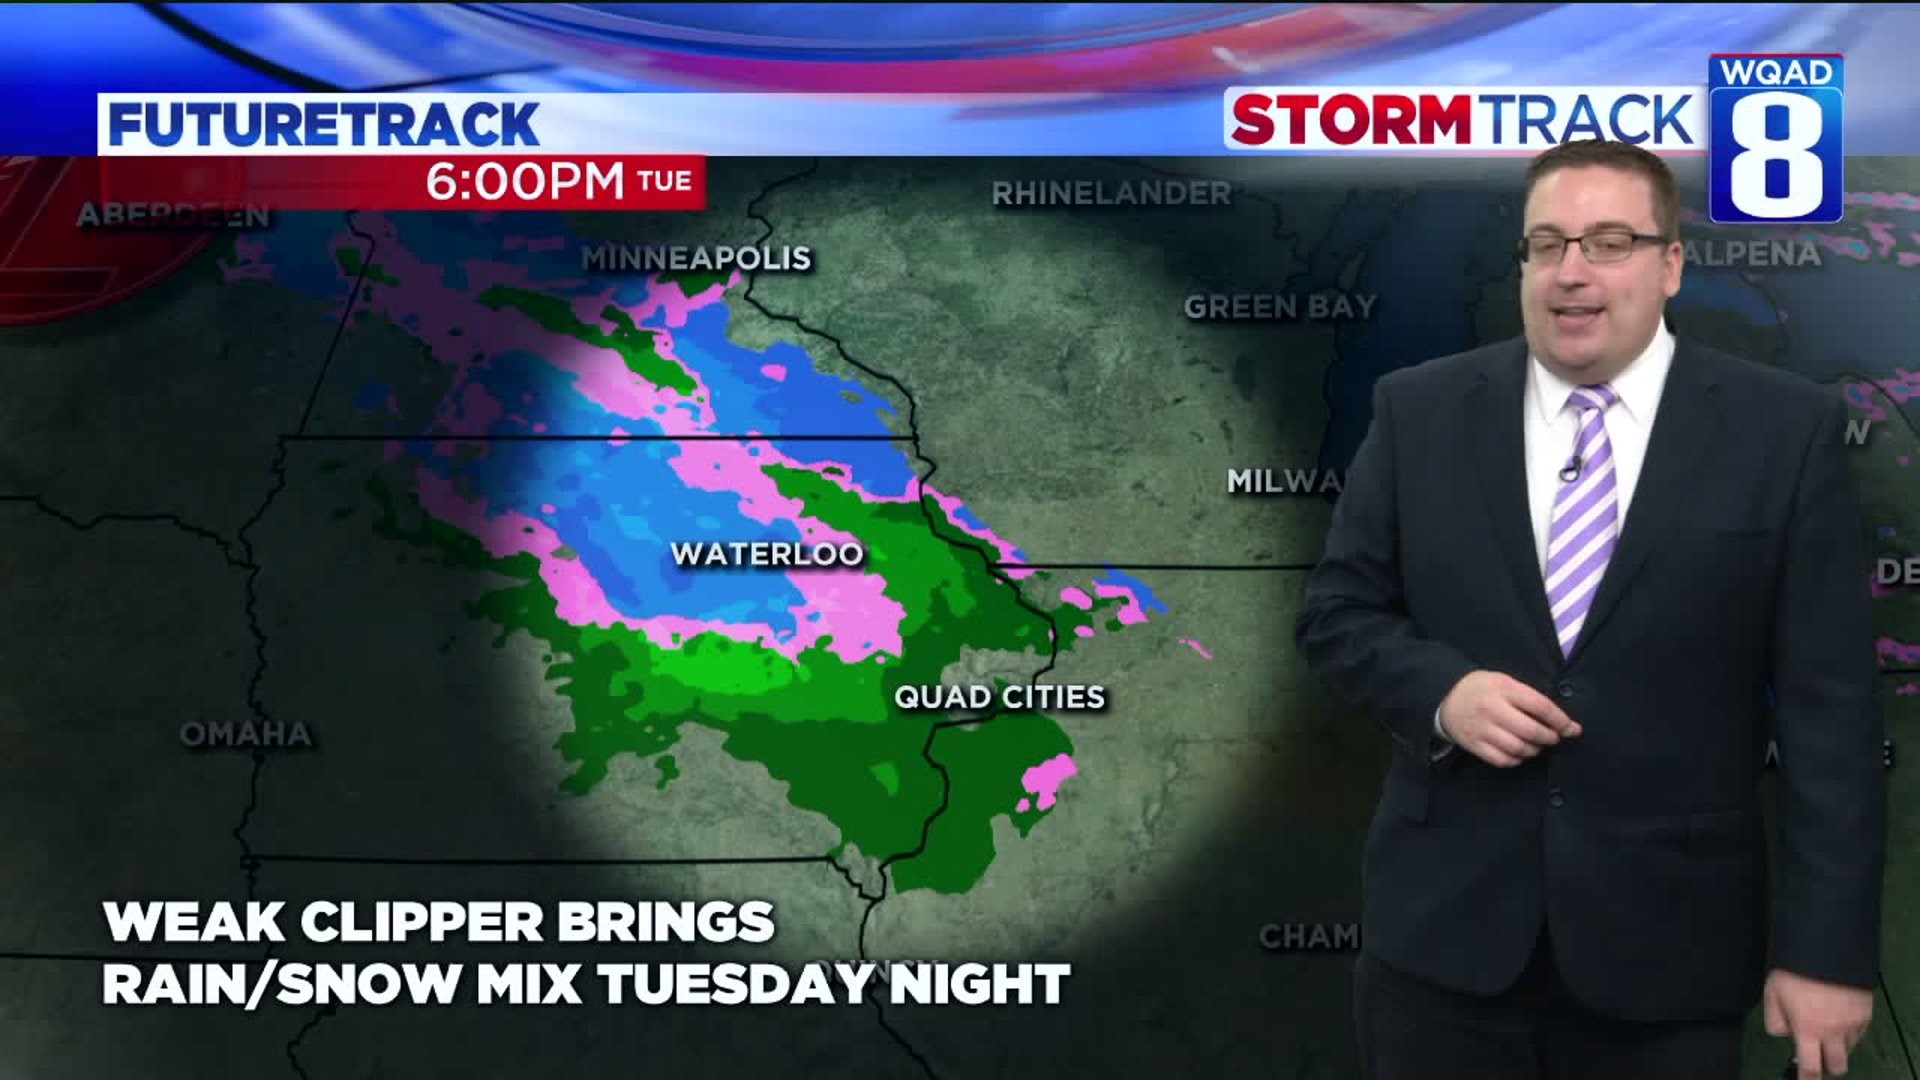 Tracking our next rain/snow mix for Tuesday